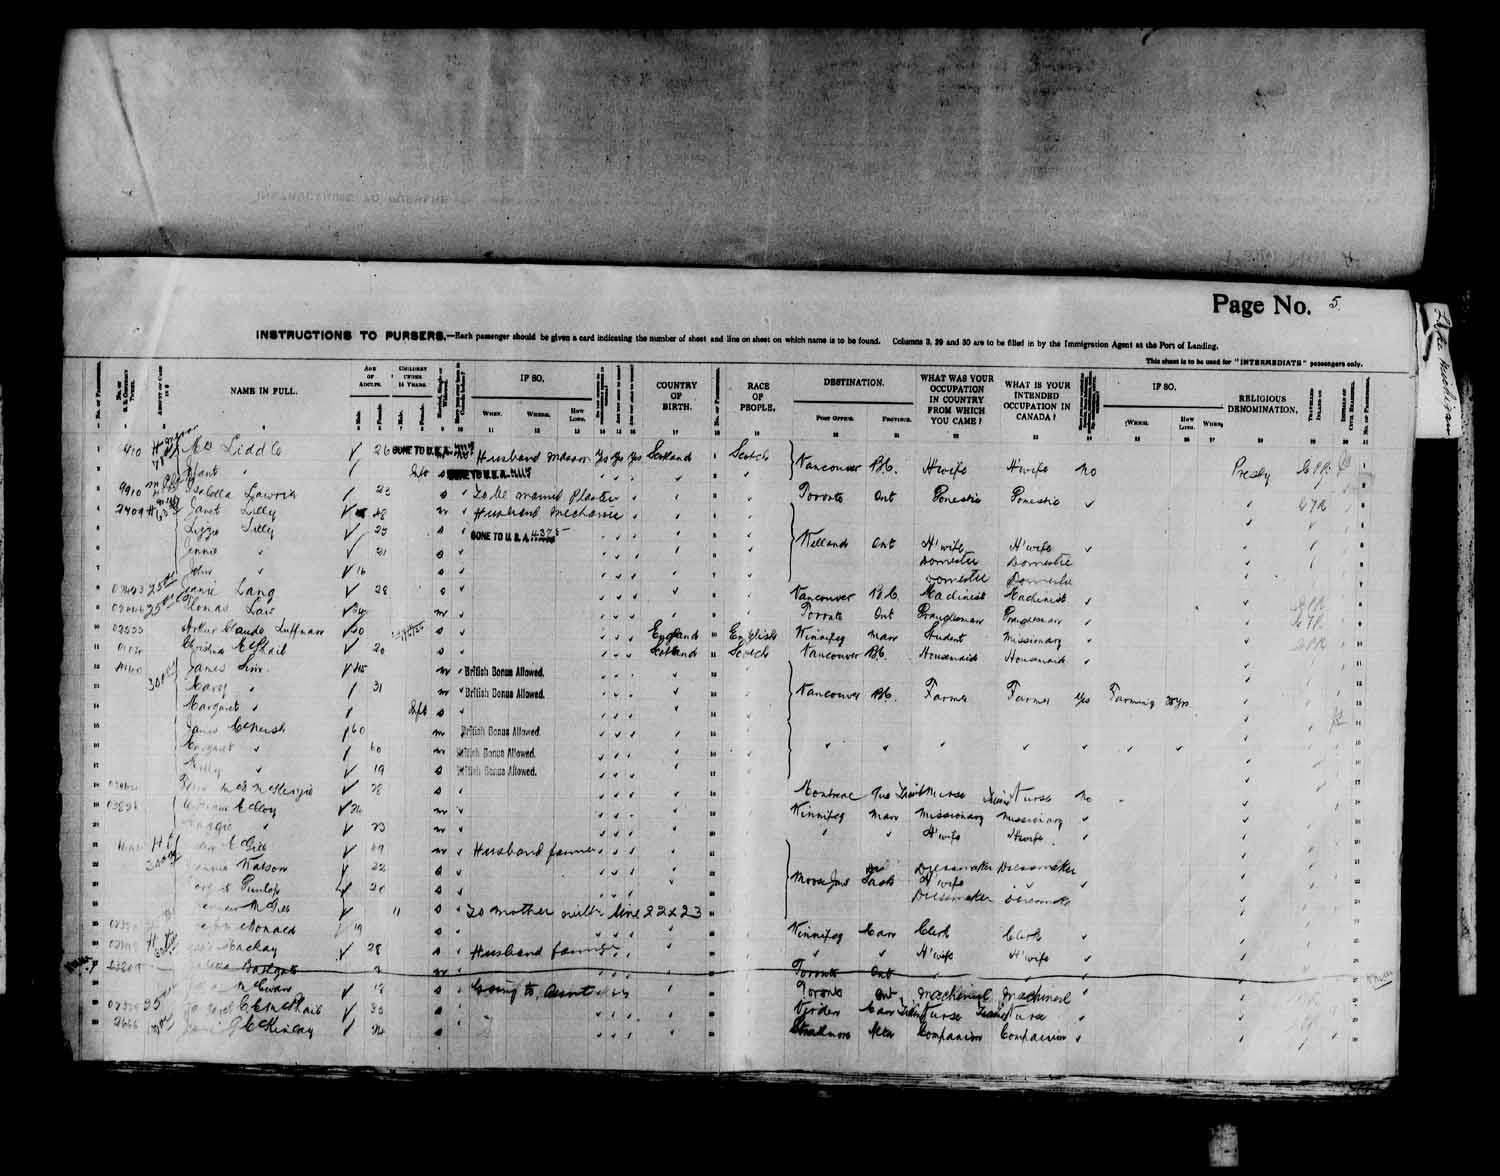 Digitized page of Passenger Lists for Image No.: e003566516